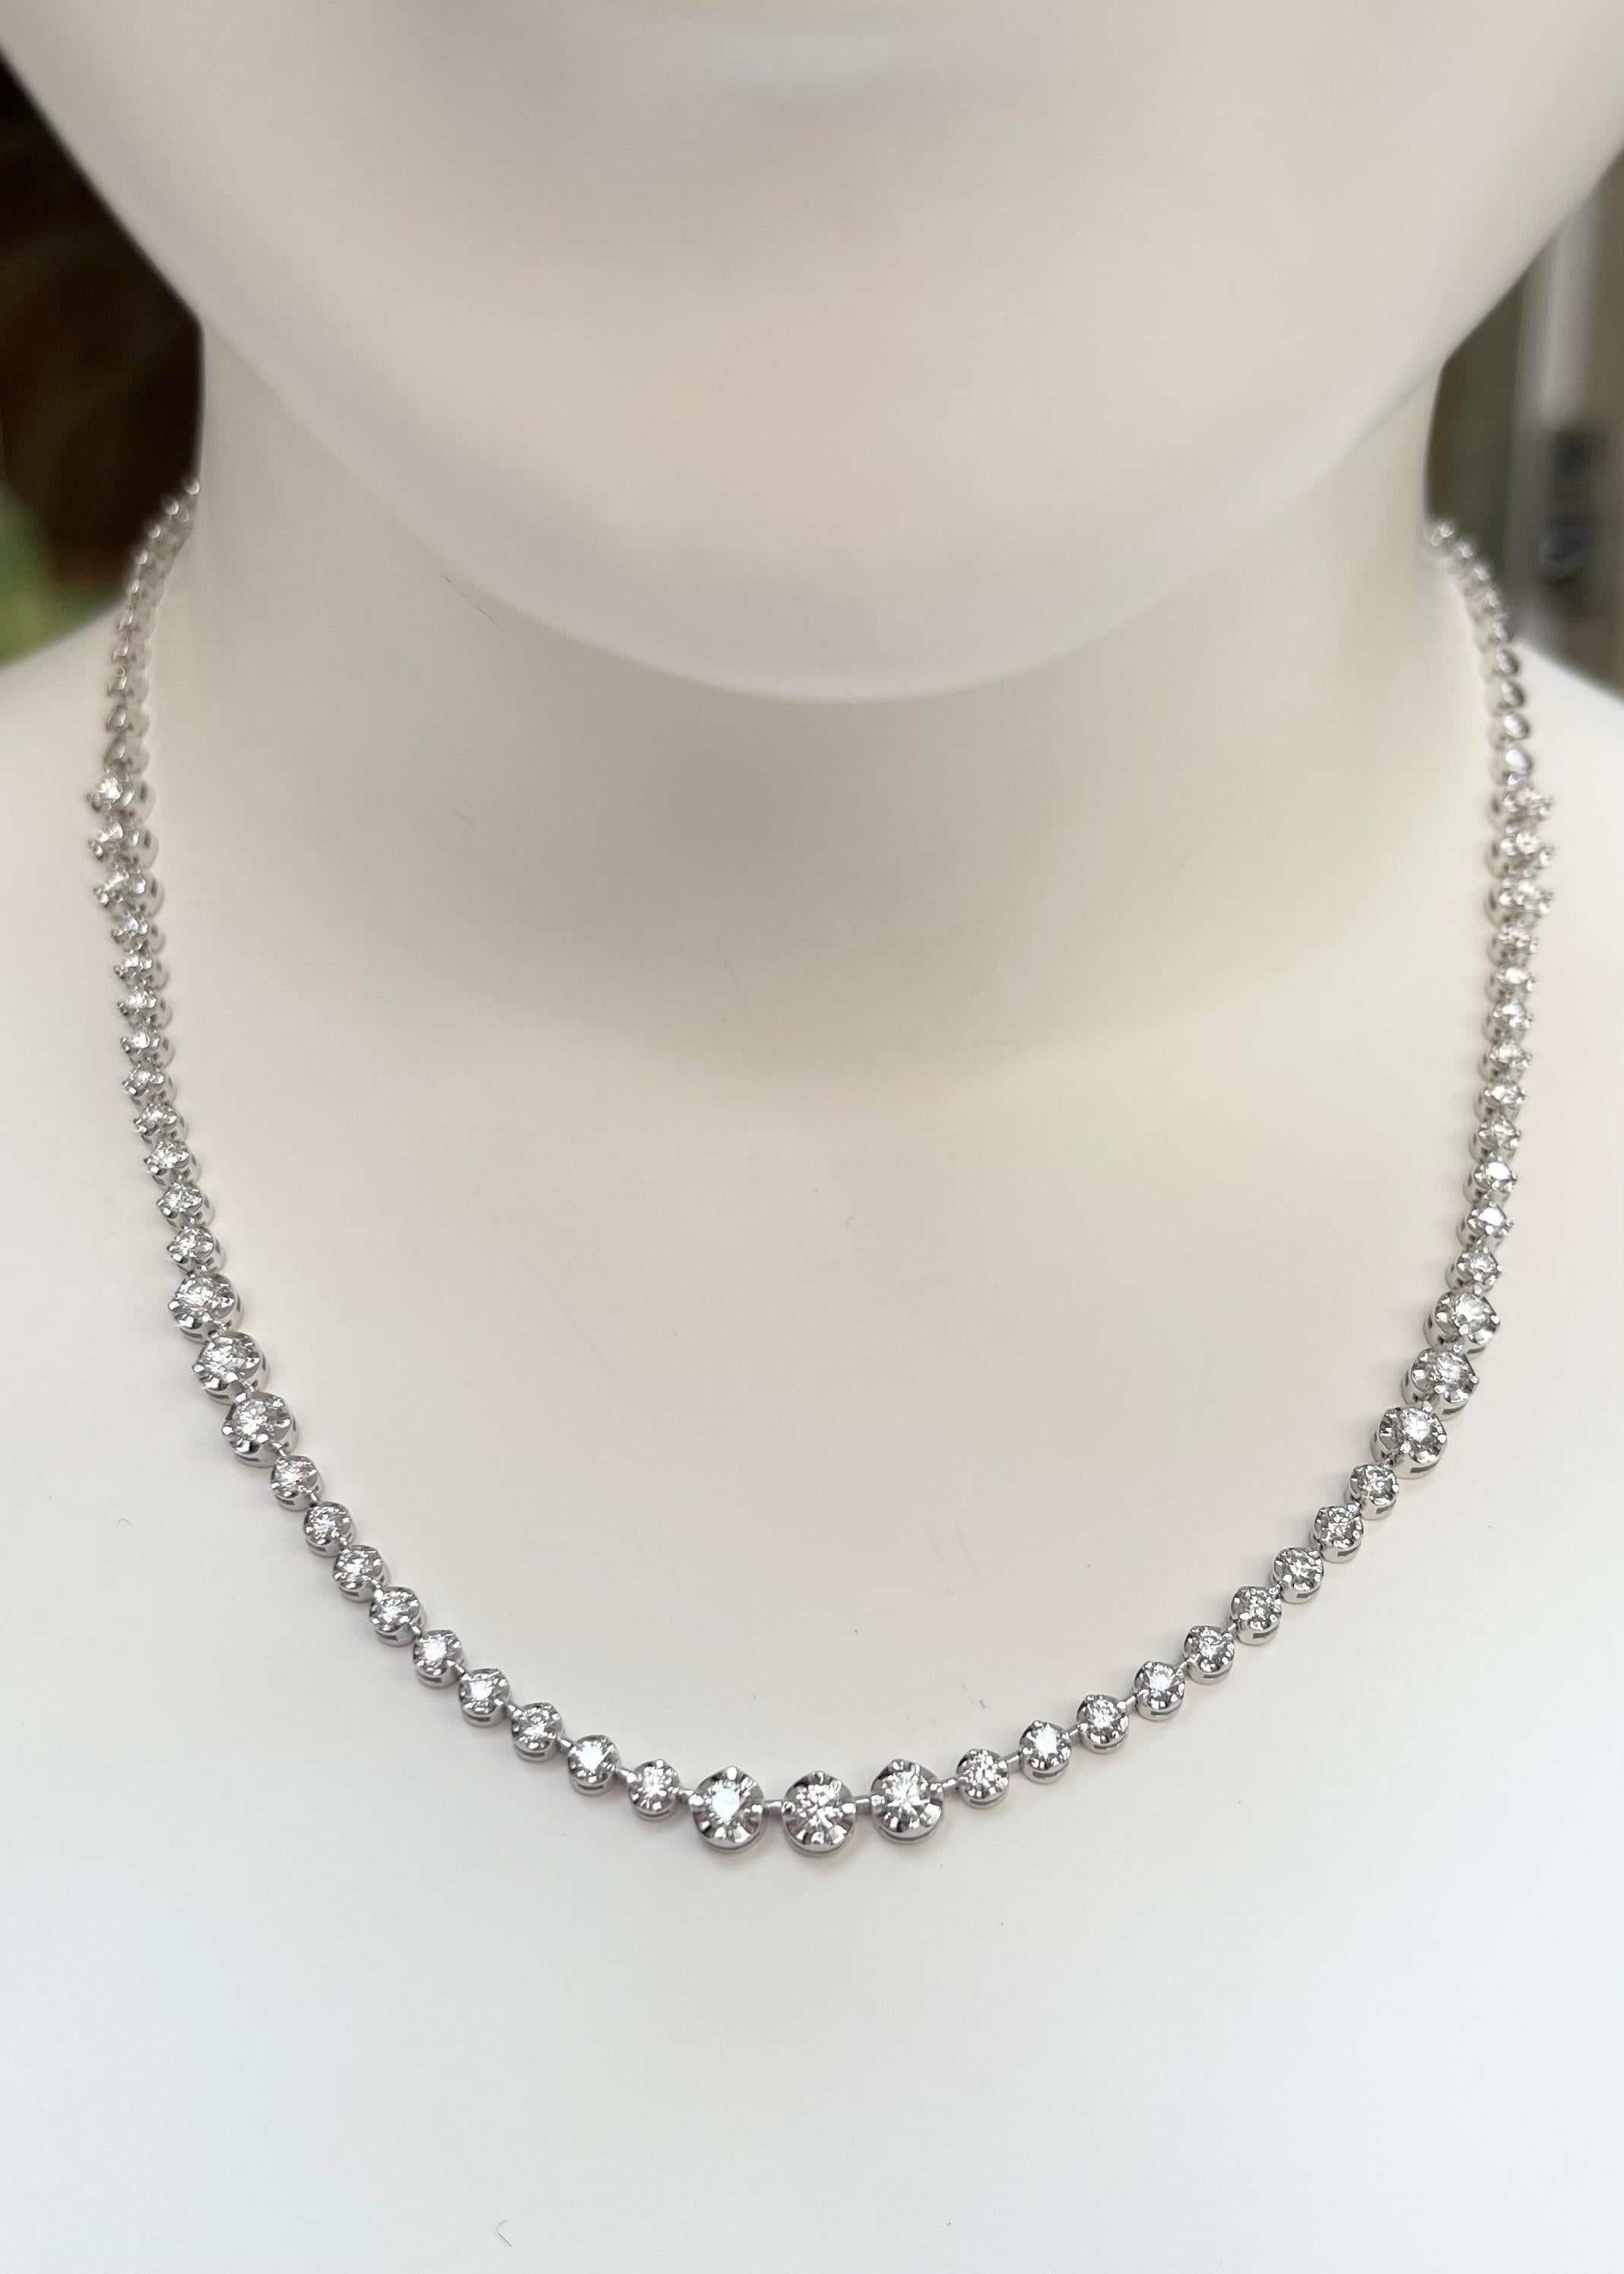 Diamond 1.48 carats Necklace set in 18K White Gold Settings

Width: 0.4 cm 
Length: 43.0 cm
Total Weight: 21.16 grams

